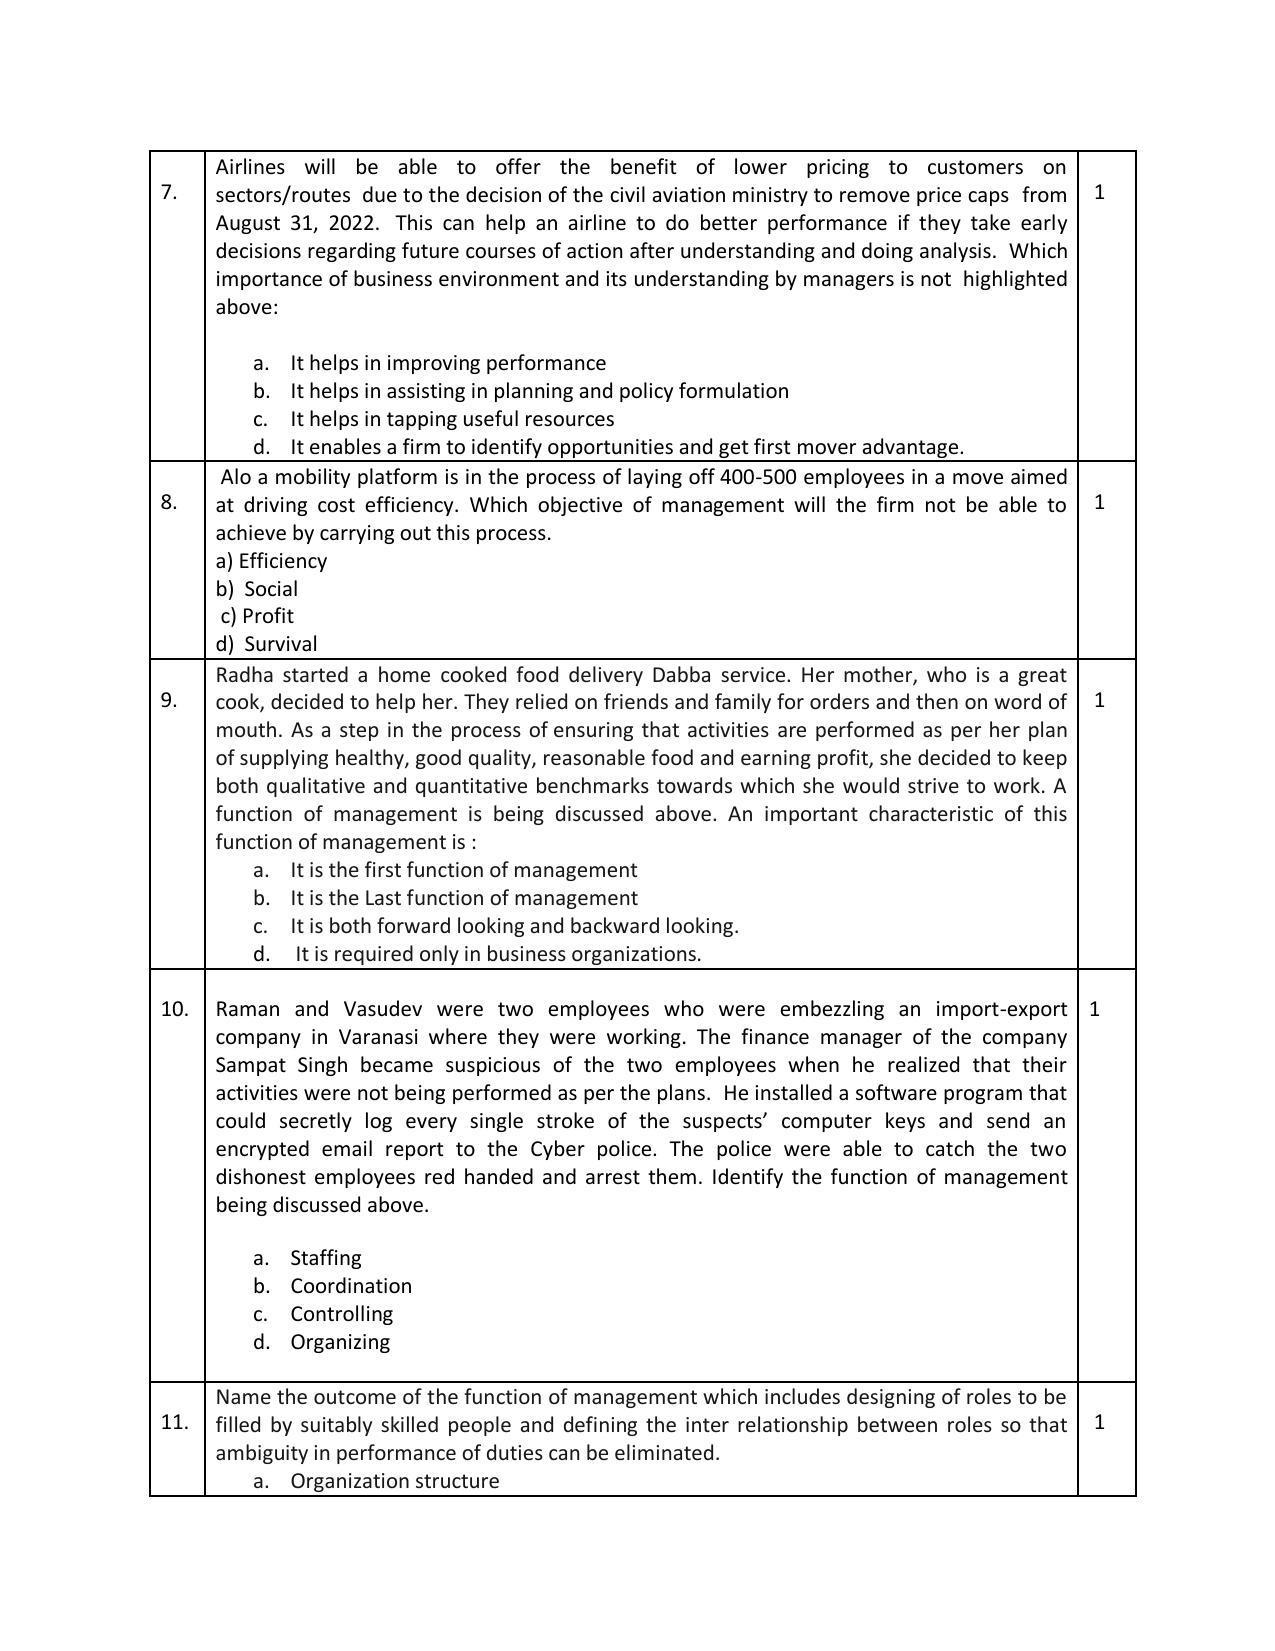 CBSE Class 12 Business Studies Sample Paper 2023 - Page 3